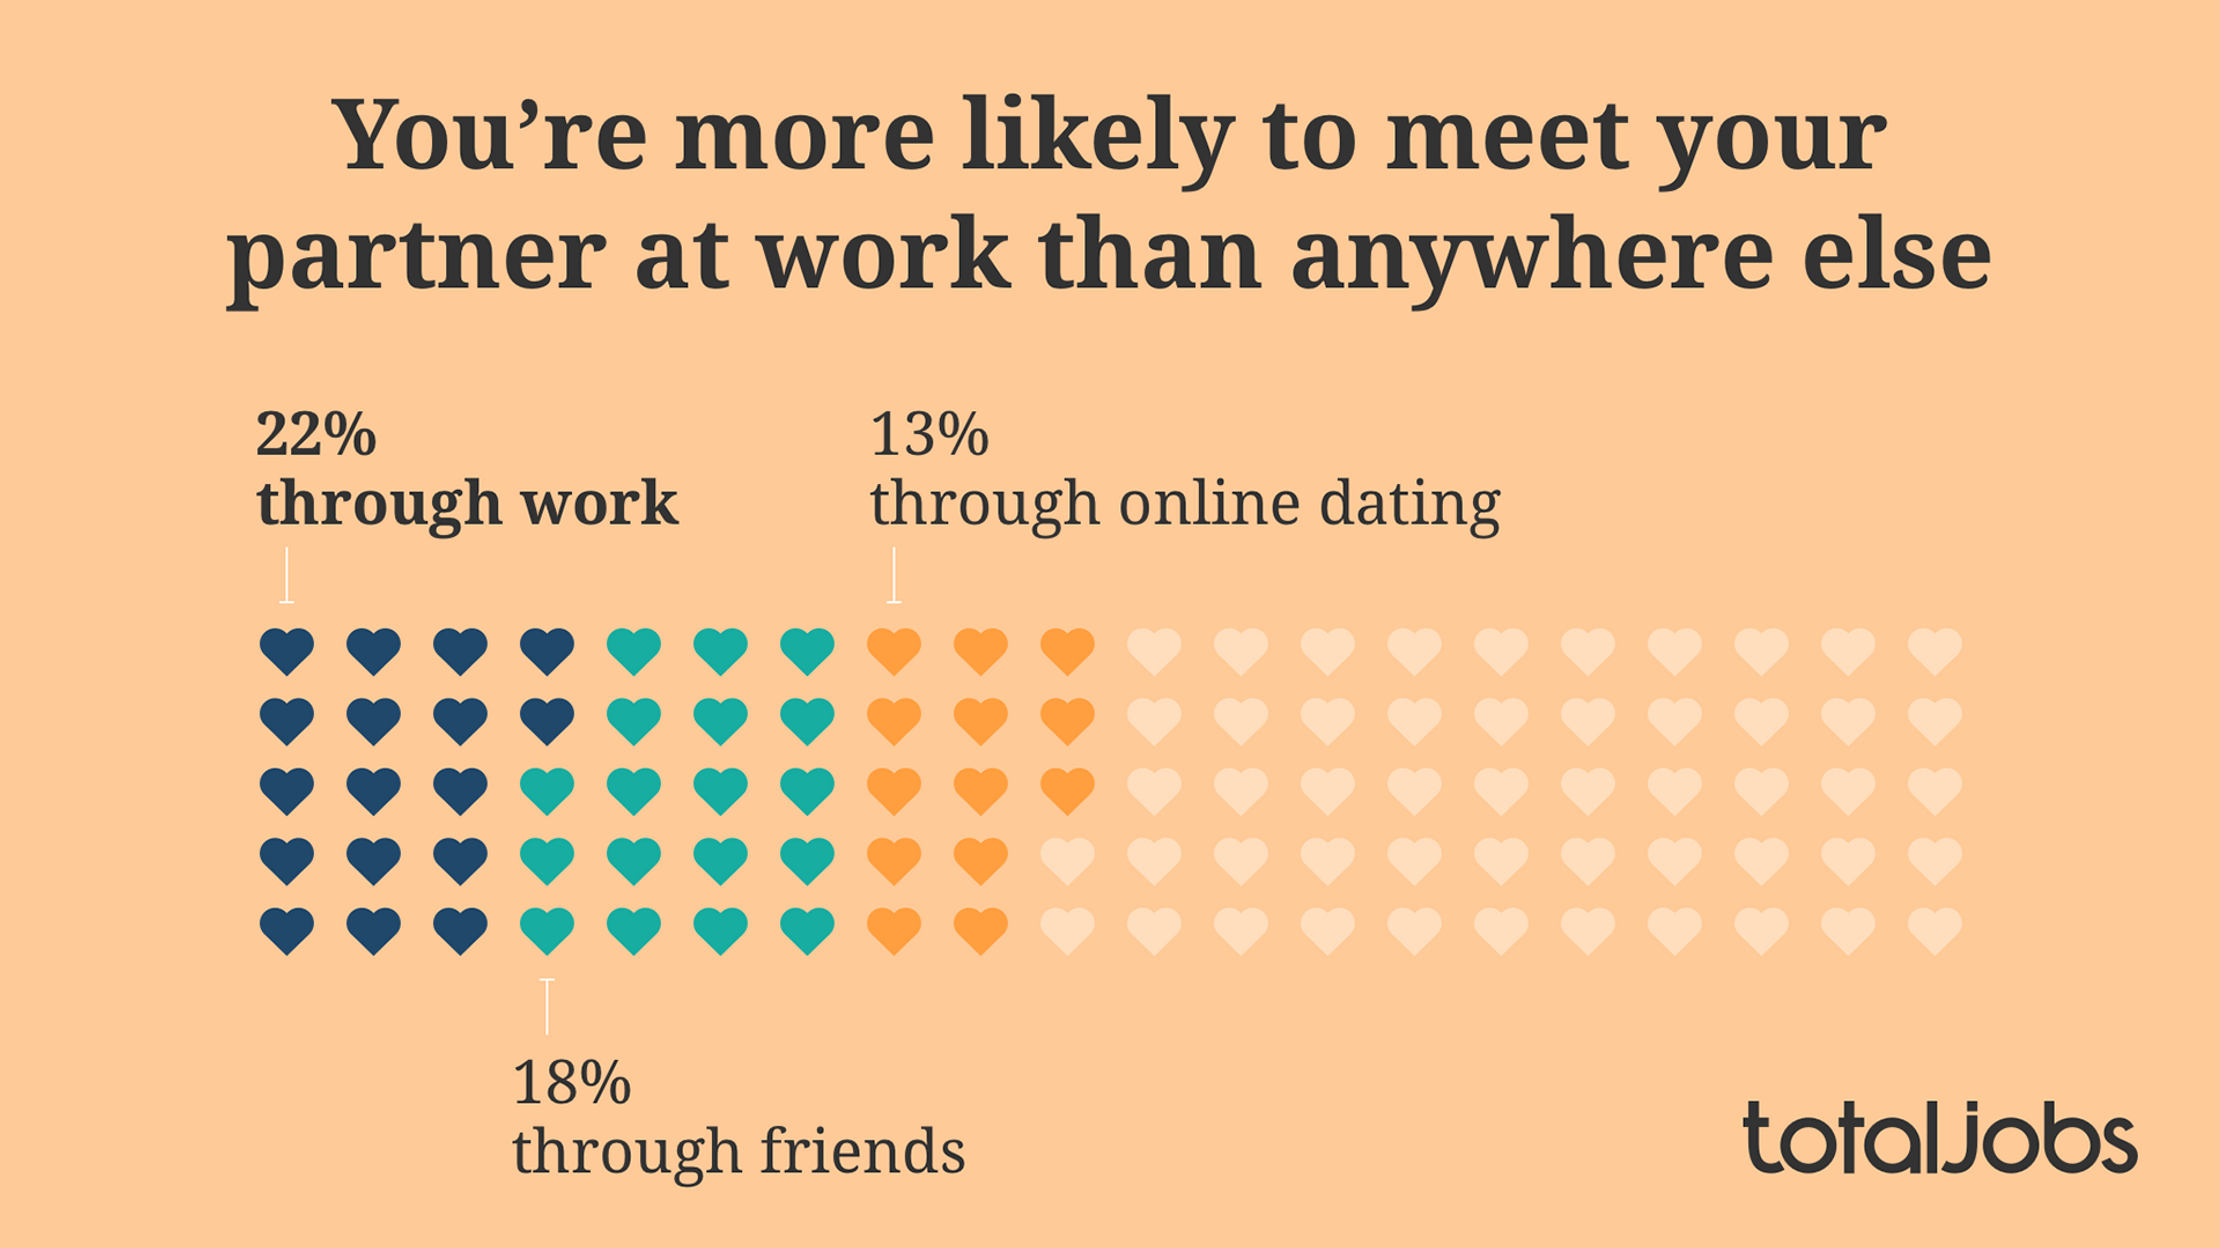 A graphic showing you're more likely to meet your partner at work than anywehere else. One hundred hearts sit on the graphic, with 13 representing 13% through online dating, 18% through friends and 22% through work.